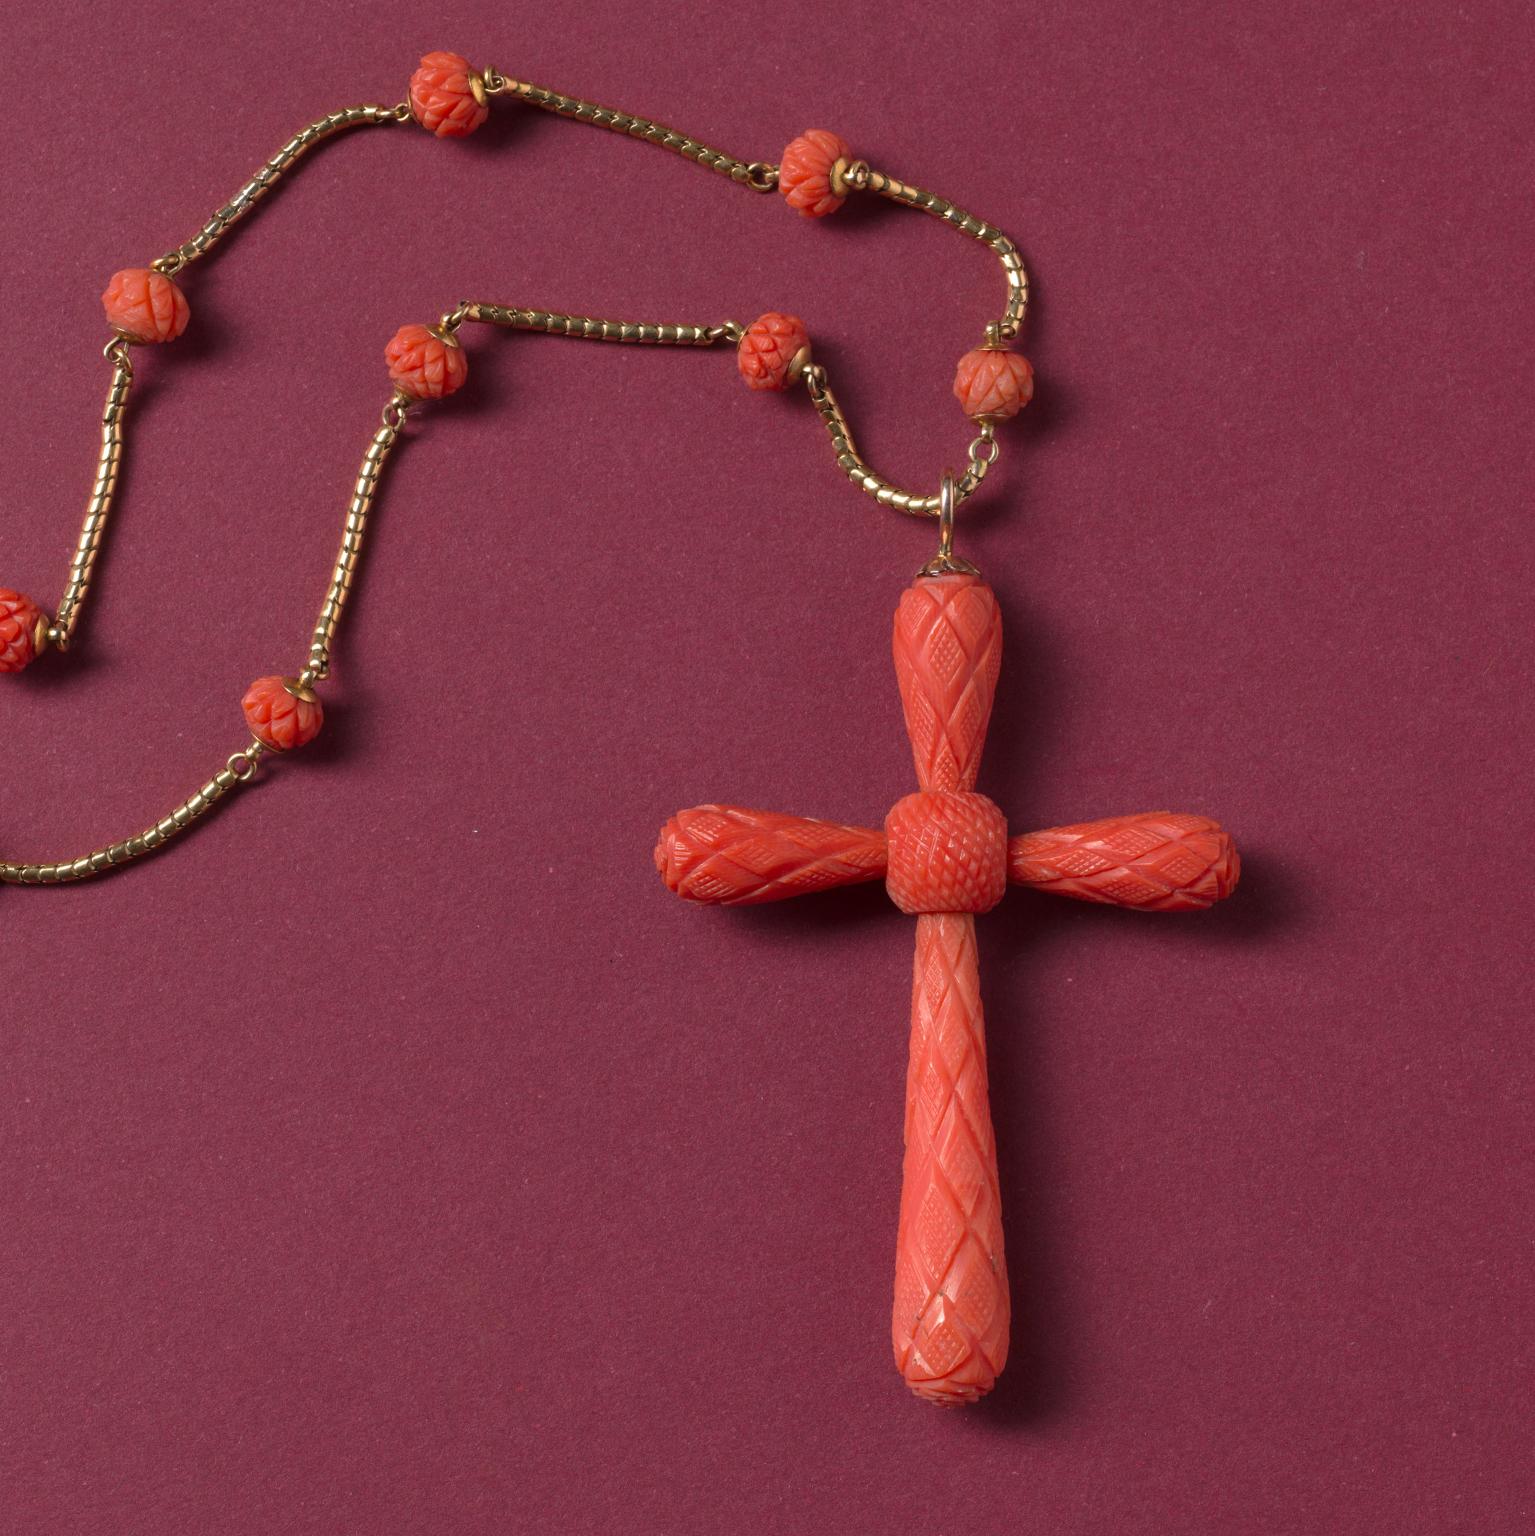 An 15 carat gold chain with 11 carved coral beads and a large coral cross pendant made our of five carved coral elements, circa 1830, English in origin.

total weight: 25.79 gram
length chain: 42 cm
dimensions bead: 6 x 7 mm
dimensions cross: 8.1 x